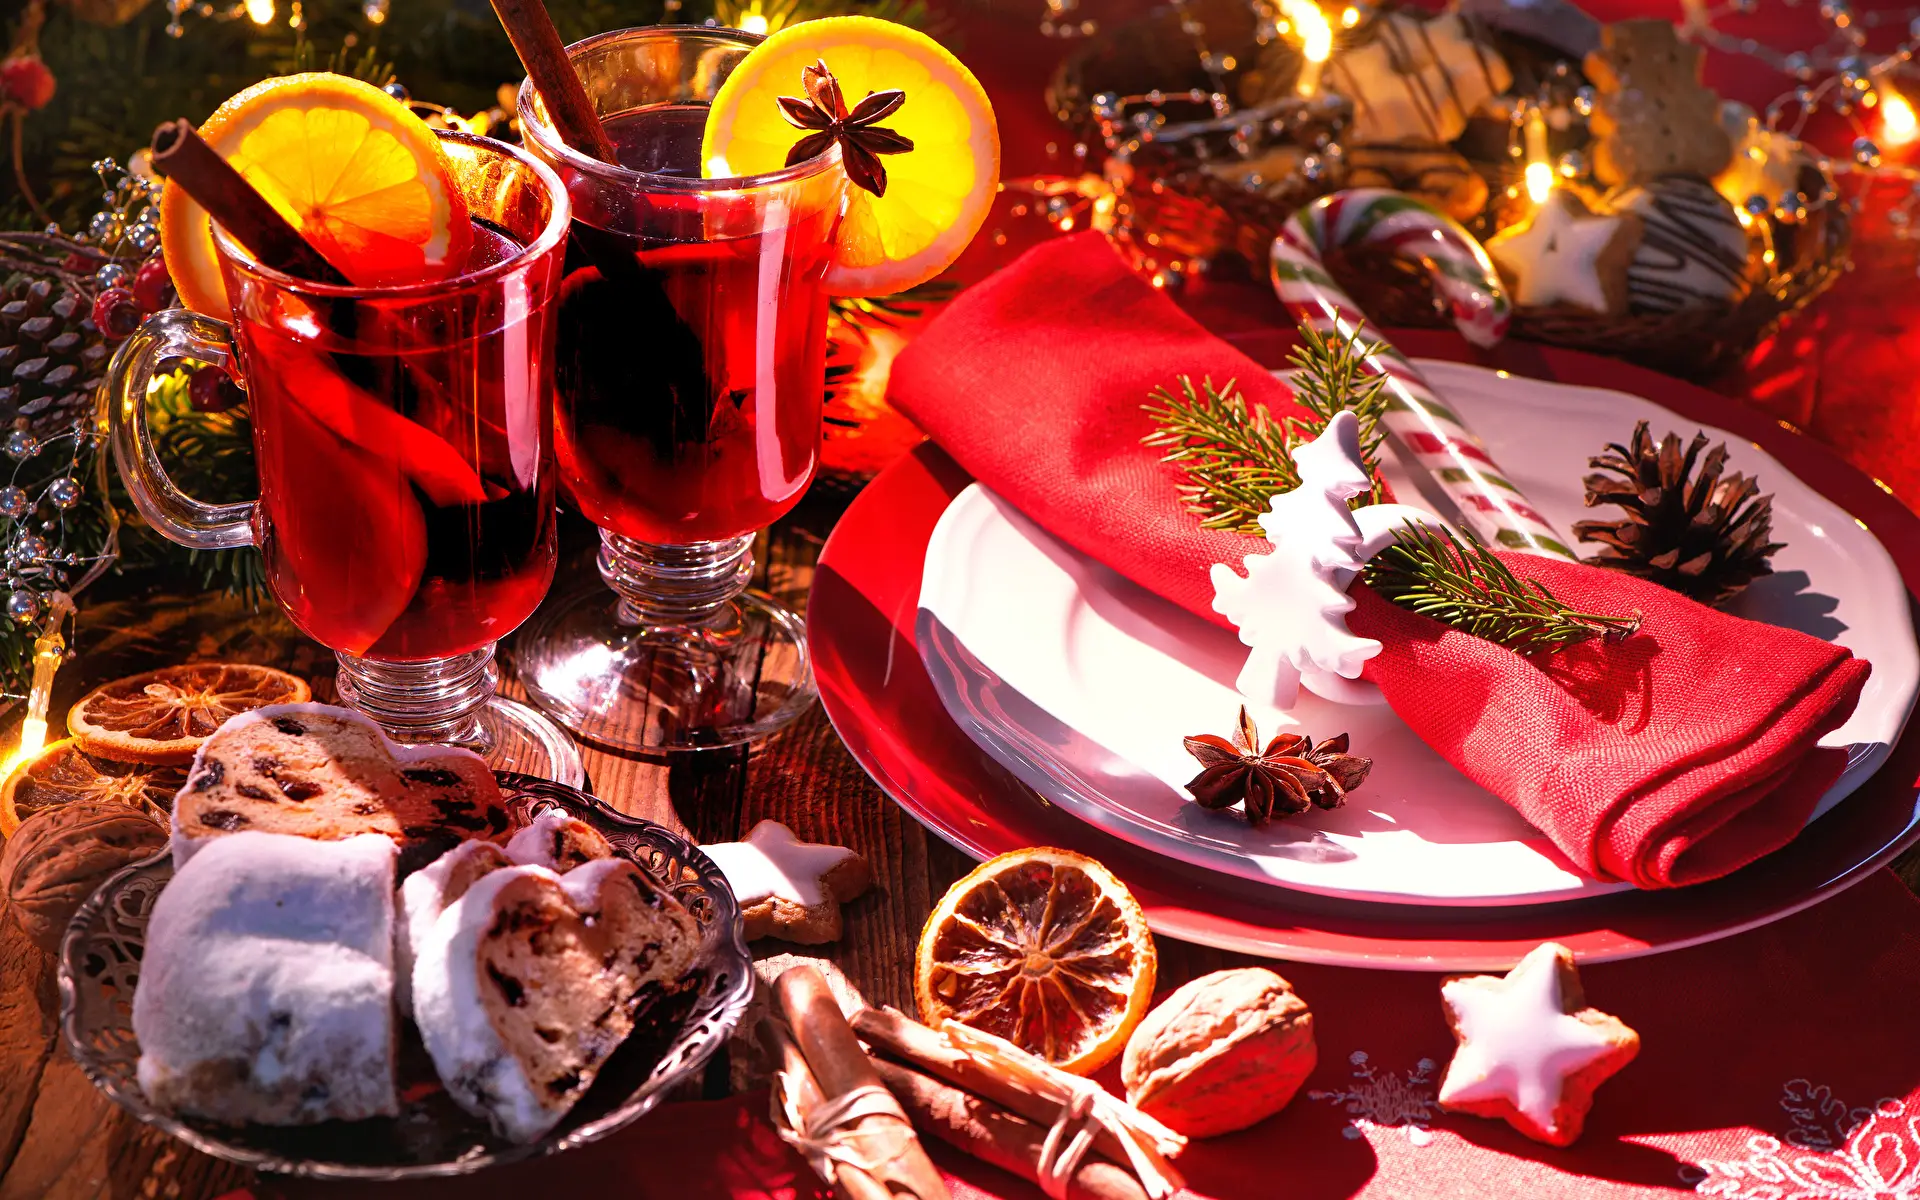 15 Cool ideas on how to decorate a table for Christmas